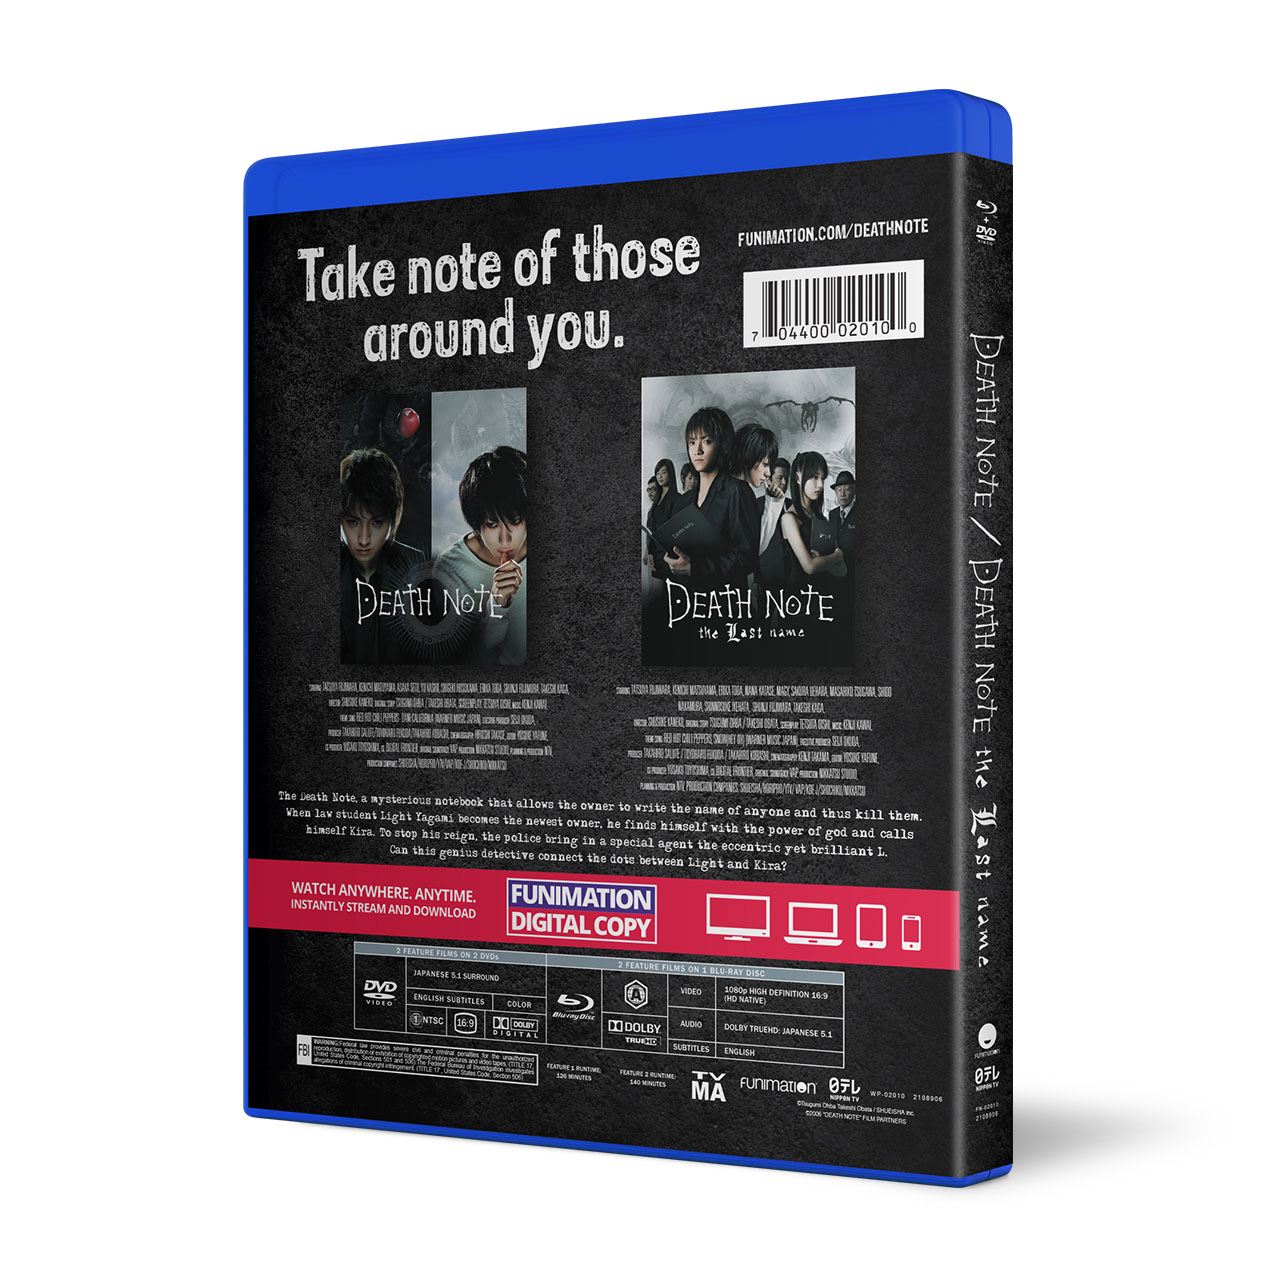 Death Note - Live Action Movies 1 & 2 - Blu-ray + DVD image count 1